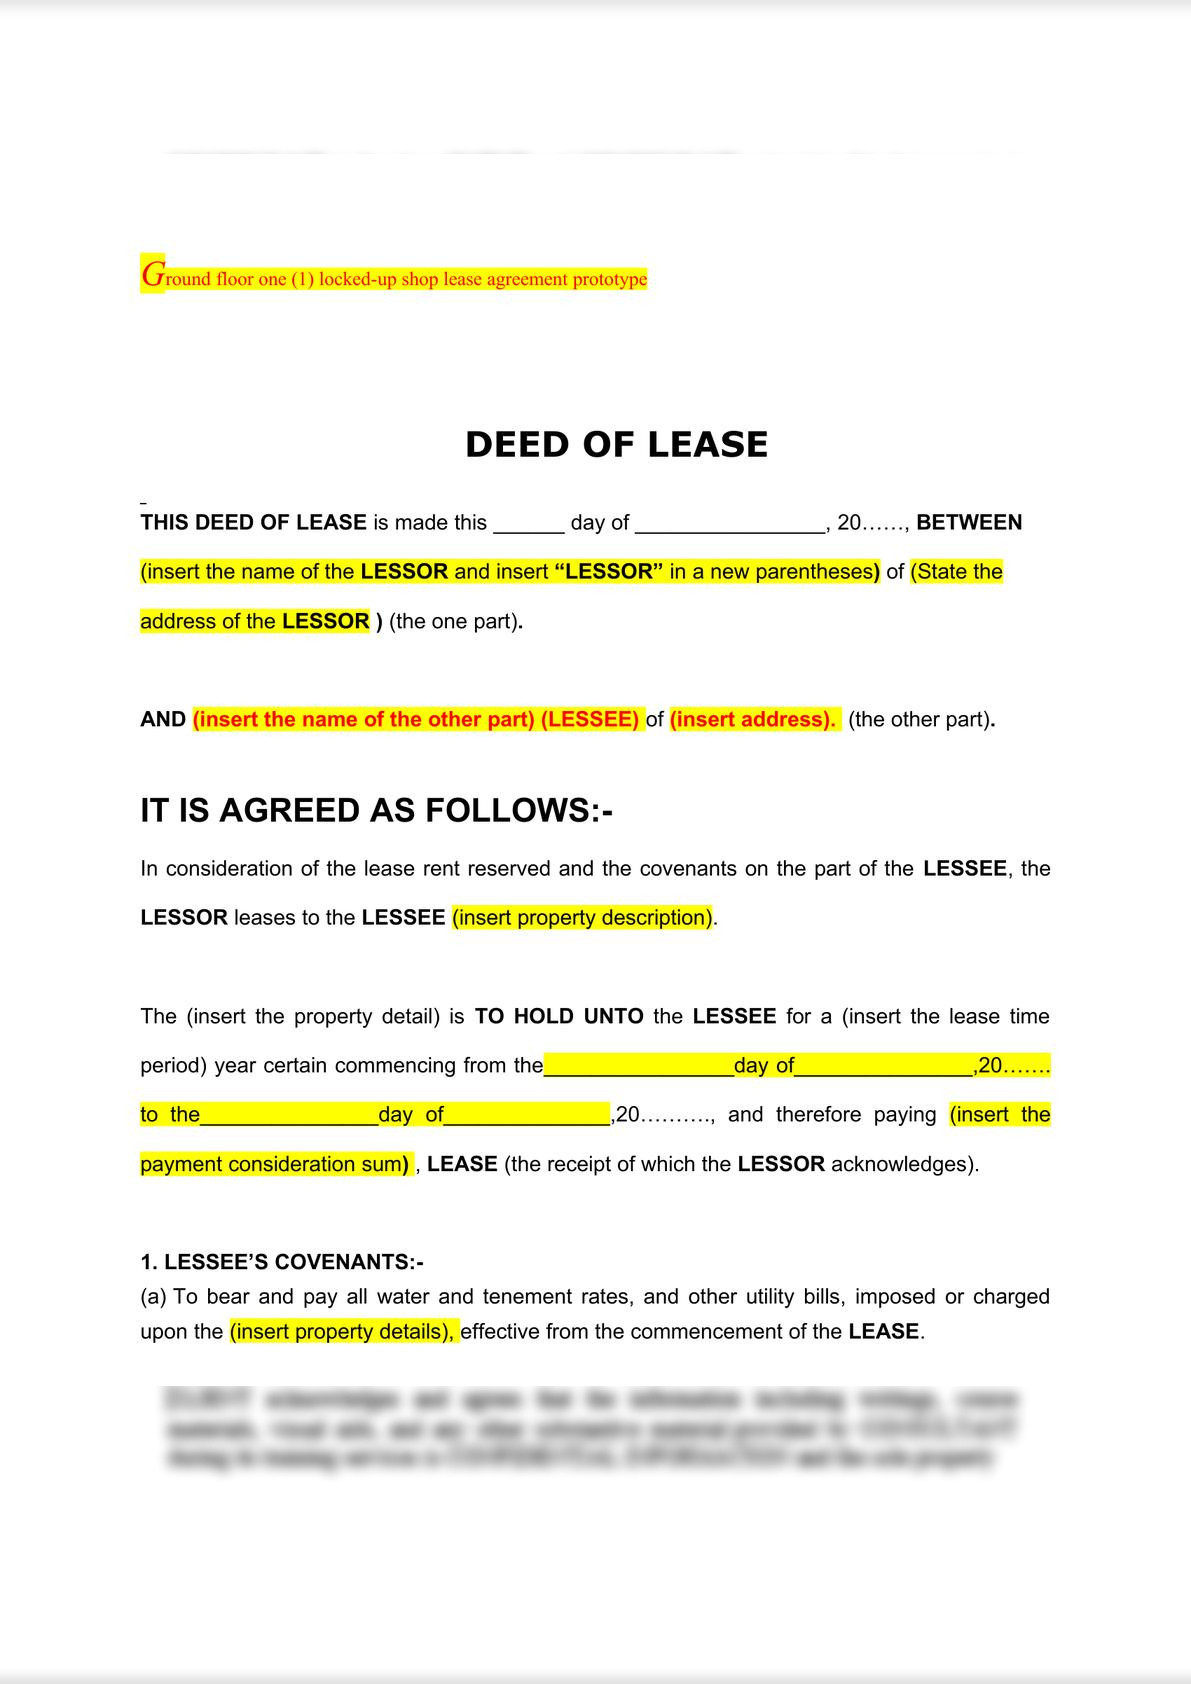 Deed of Lease-0